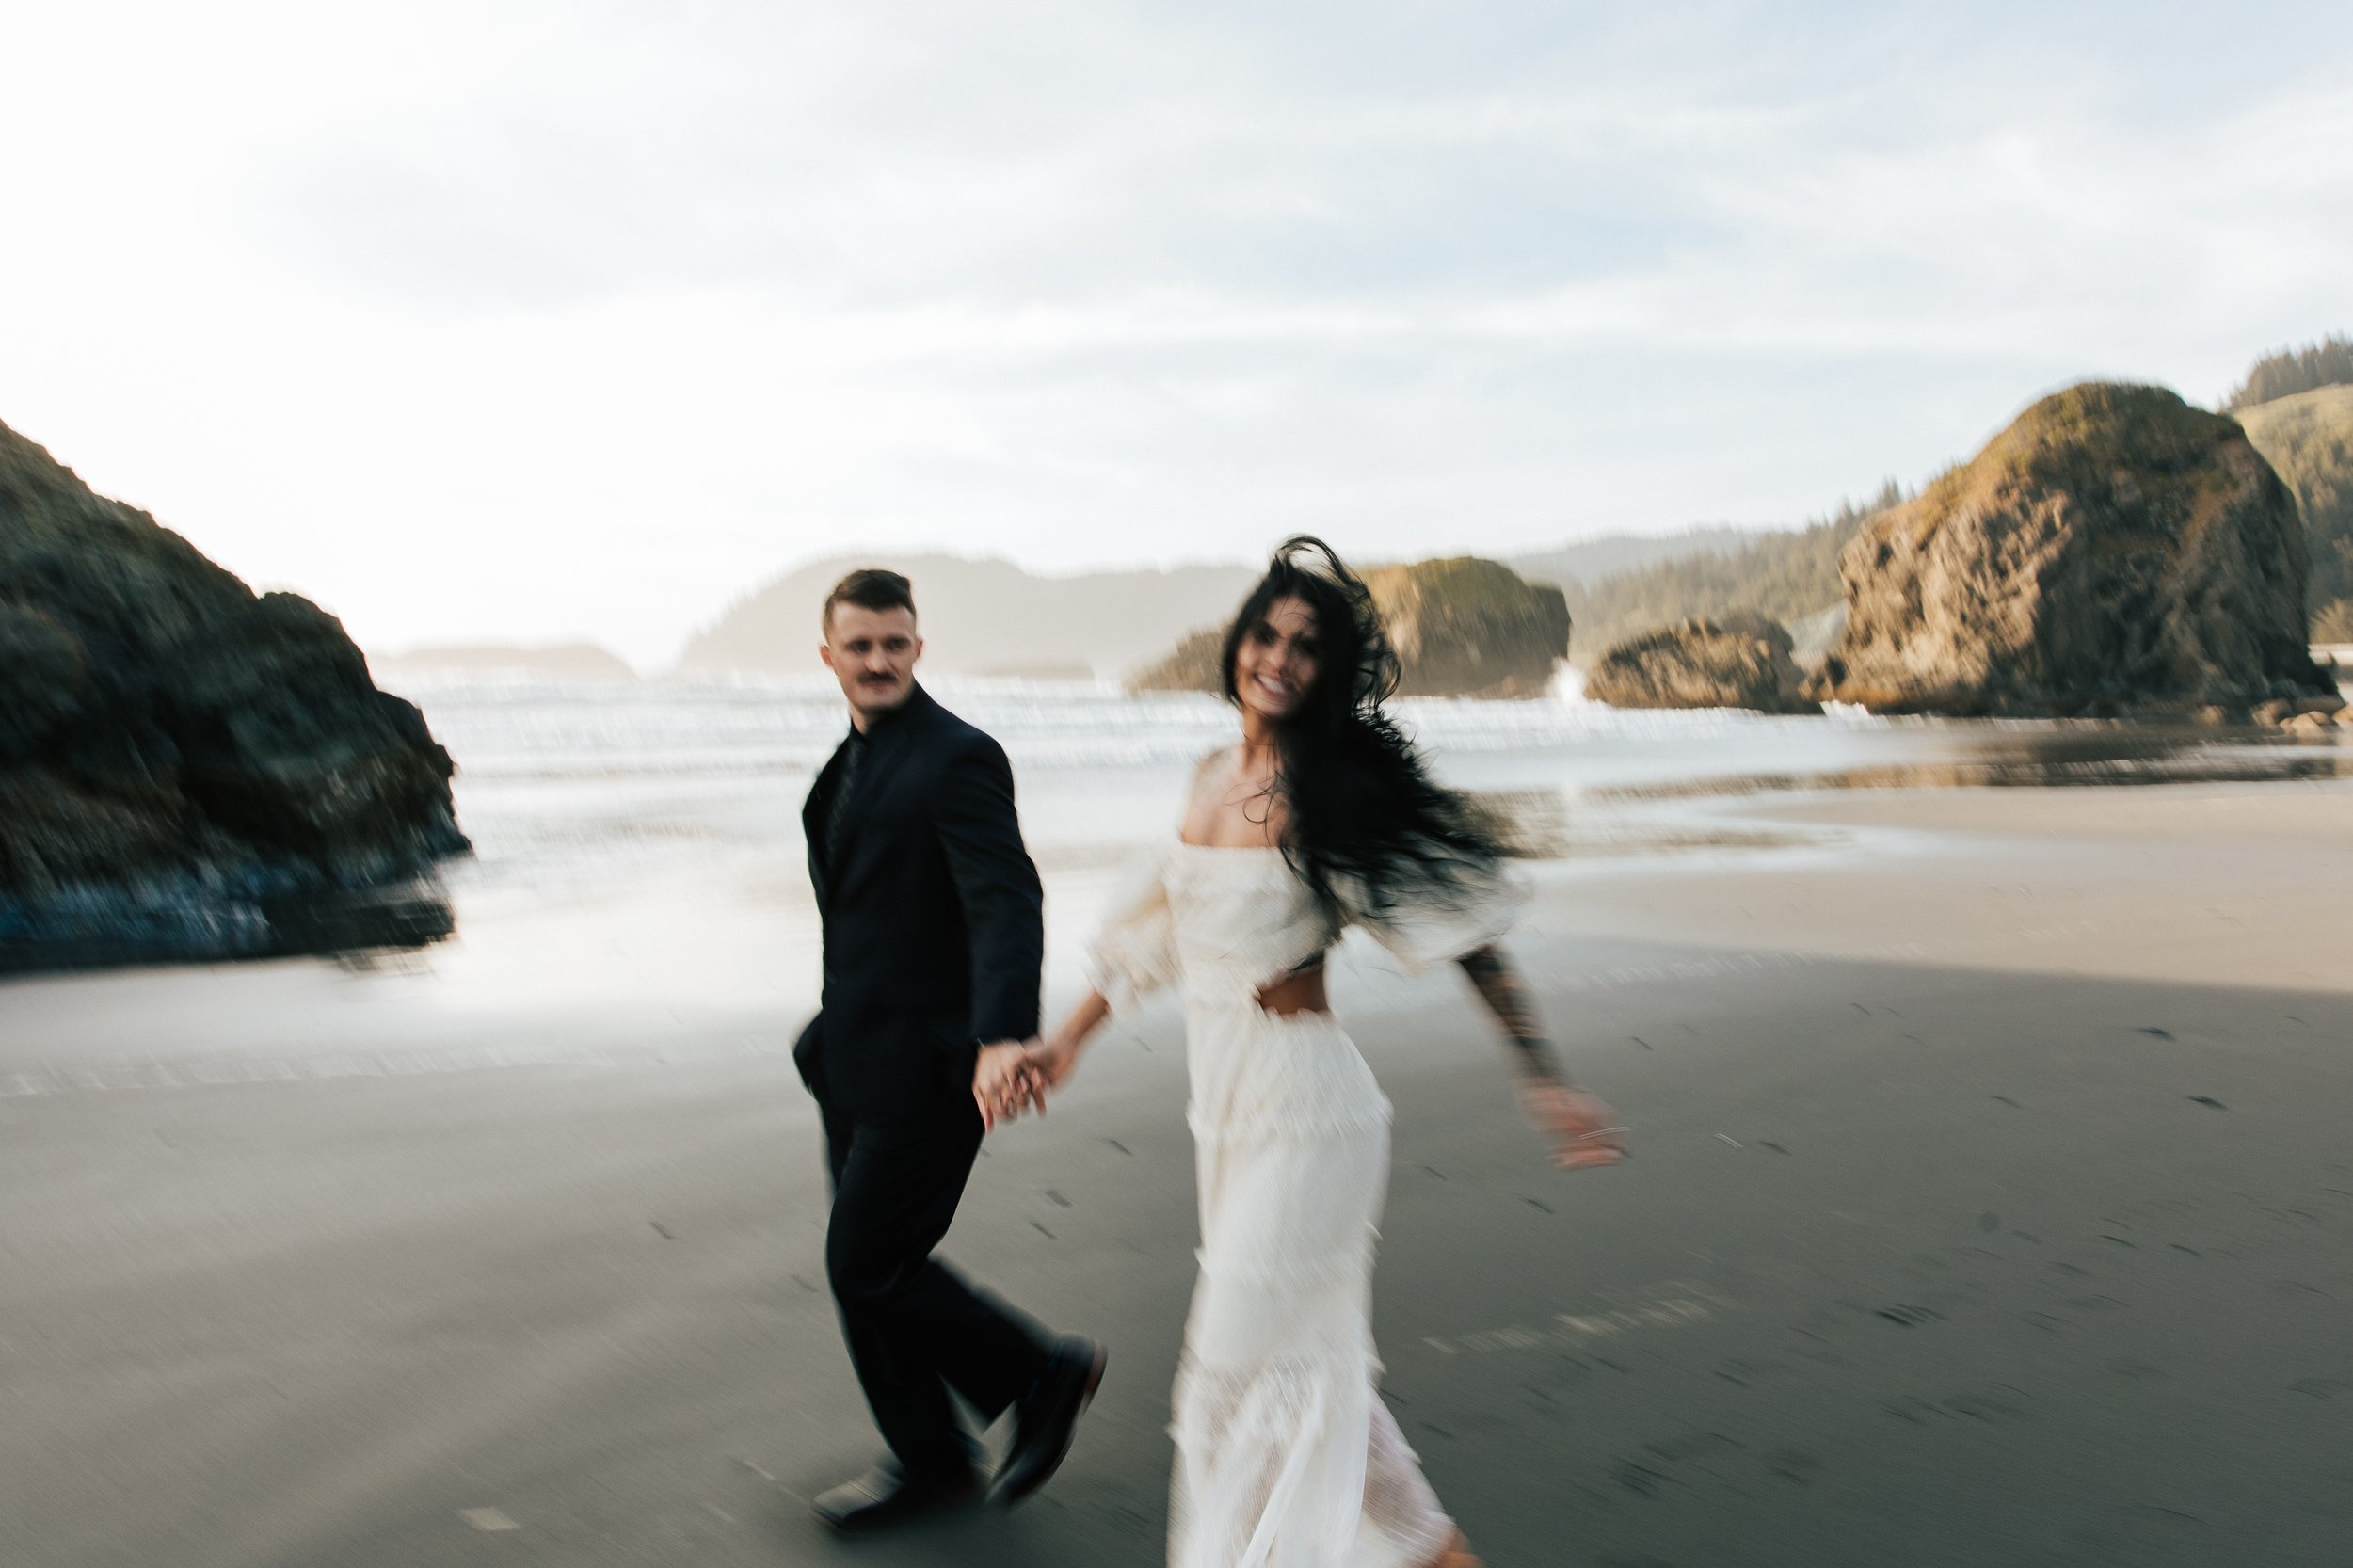  Oregon coast elopement. Couple elopes on the beach with the sun shining behind them. Sun rays behind rocks. Beach with rocks and haystacks. Southern Oregon. Golden hour photos after elopement ceremony. Couple laughs together on the beach. #oregoncoa